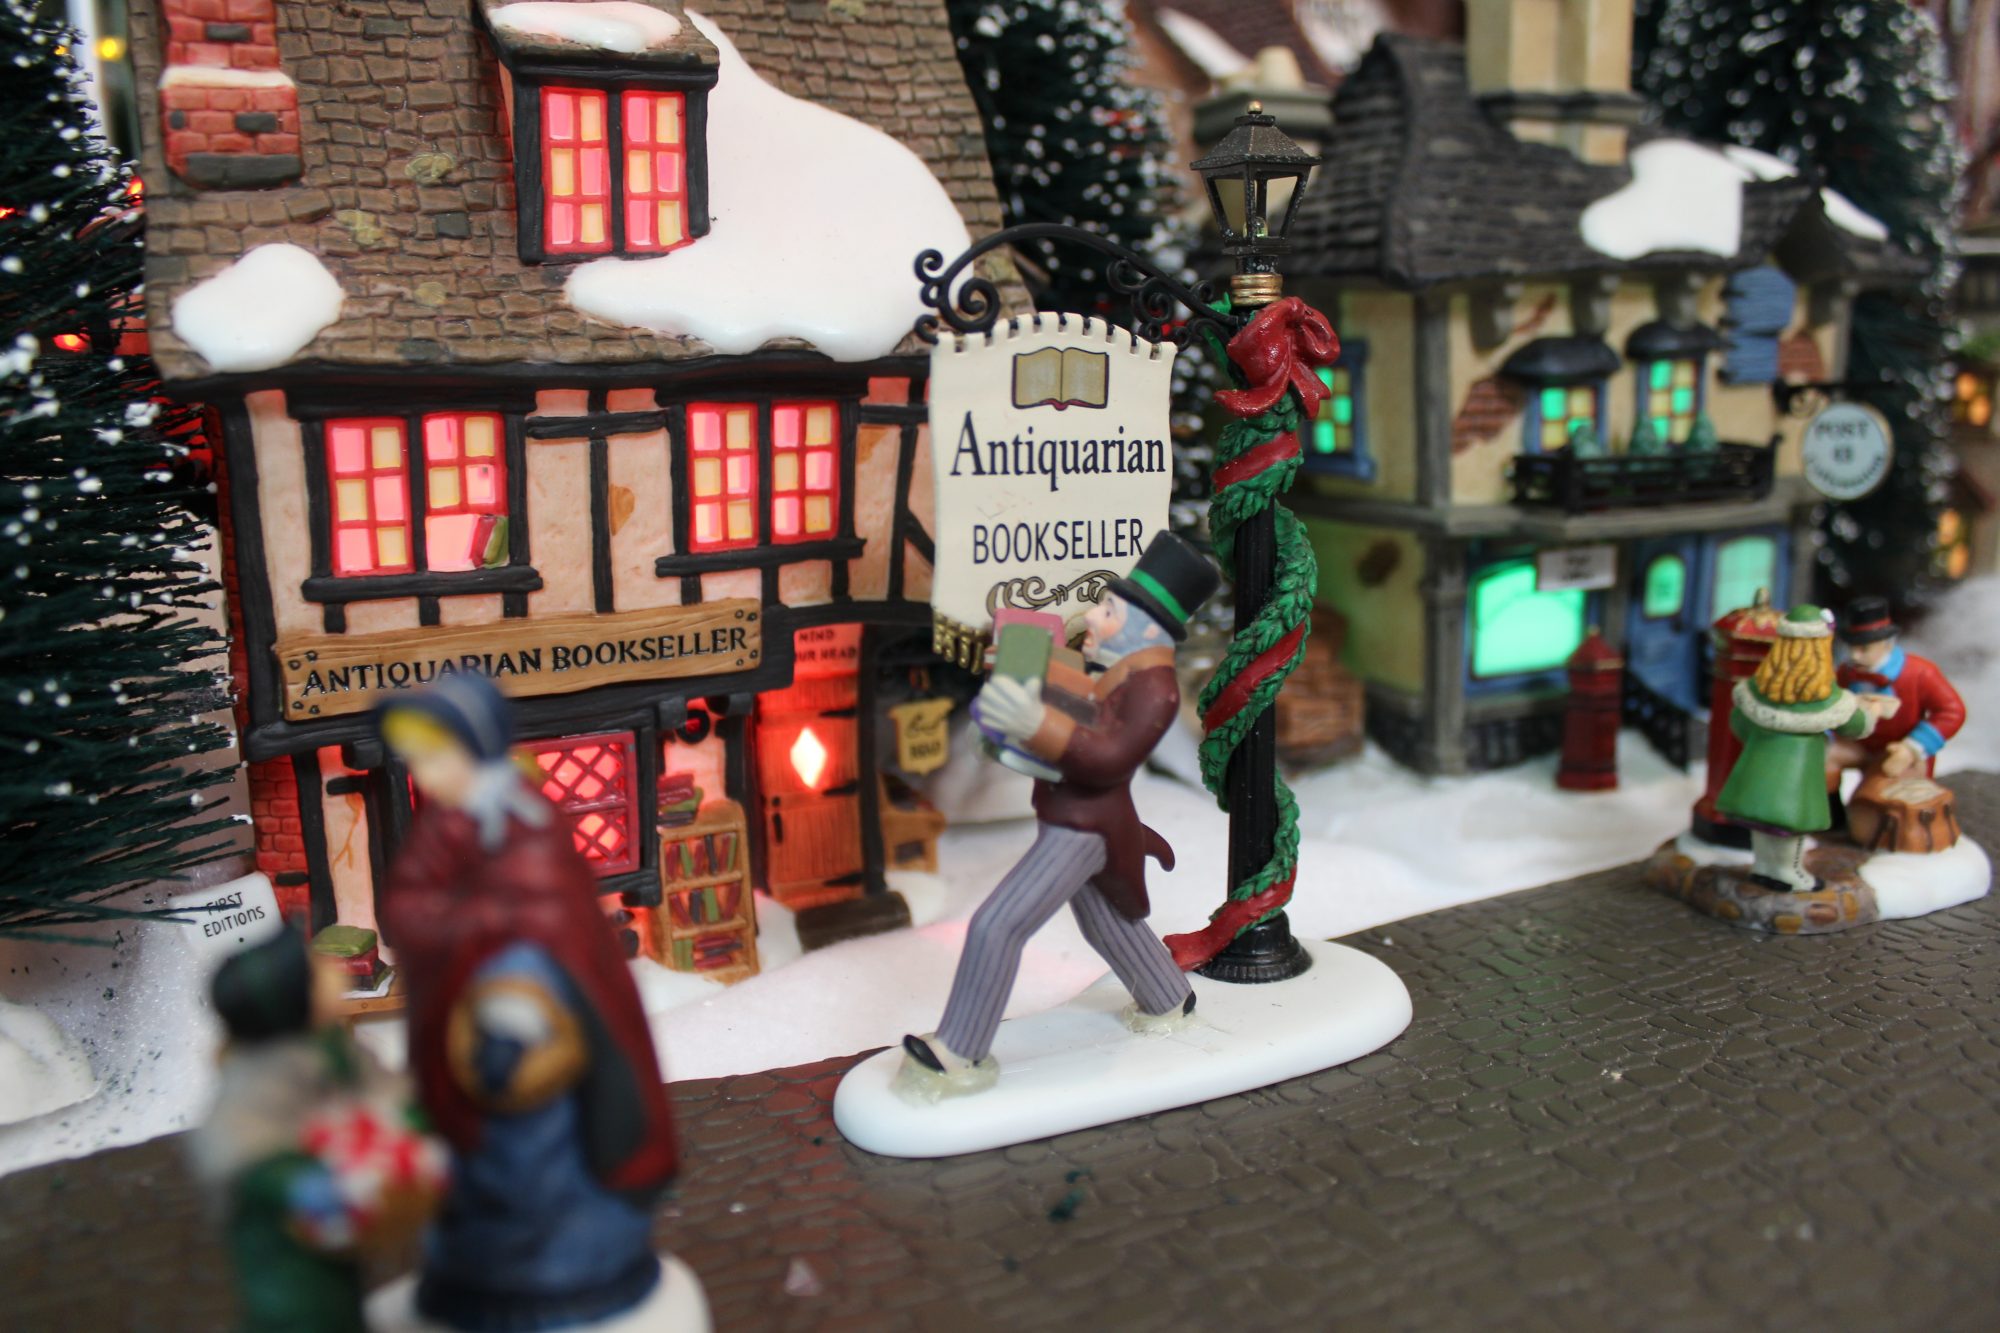 A Dickens Christmas: The Urban Family Holiday Exhibition